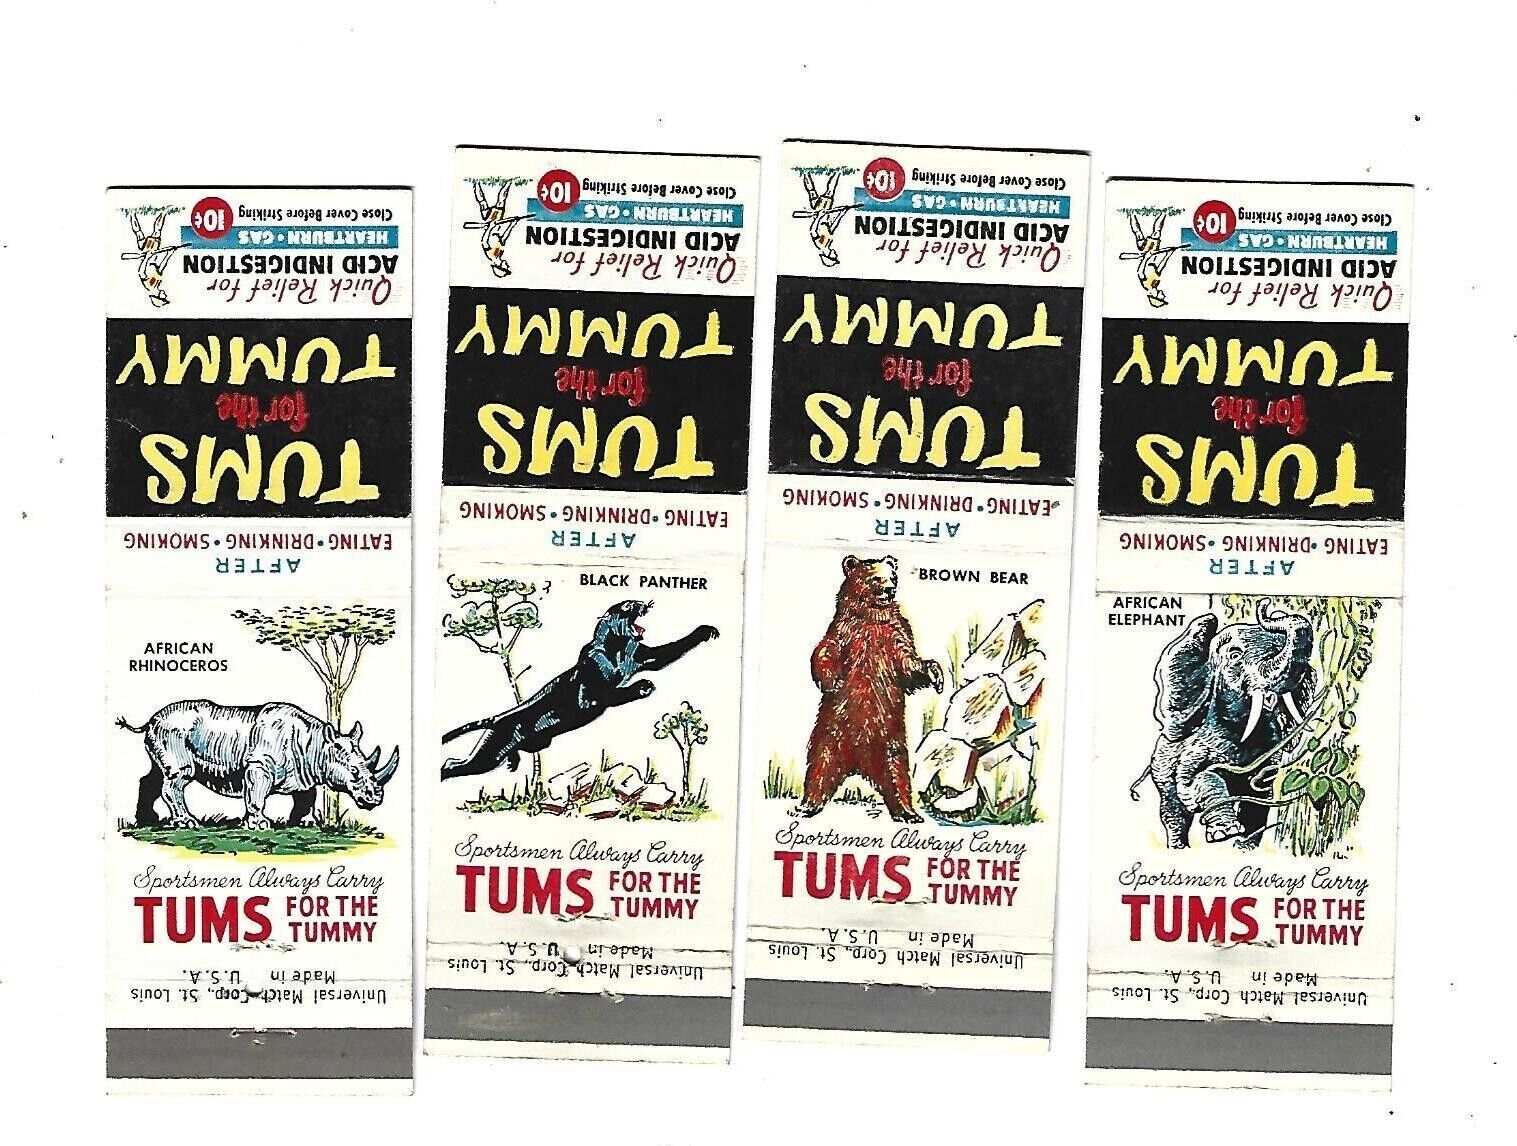 4 Tums for the Tummy - 10 cents    Matchcovers    Wild Animals